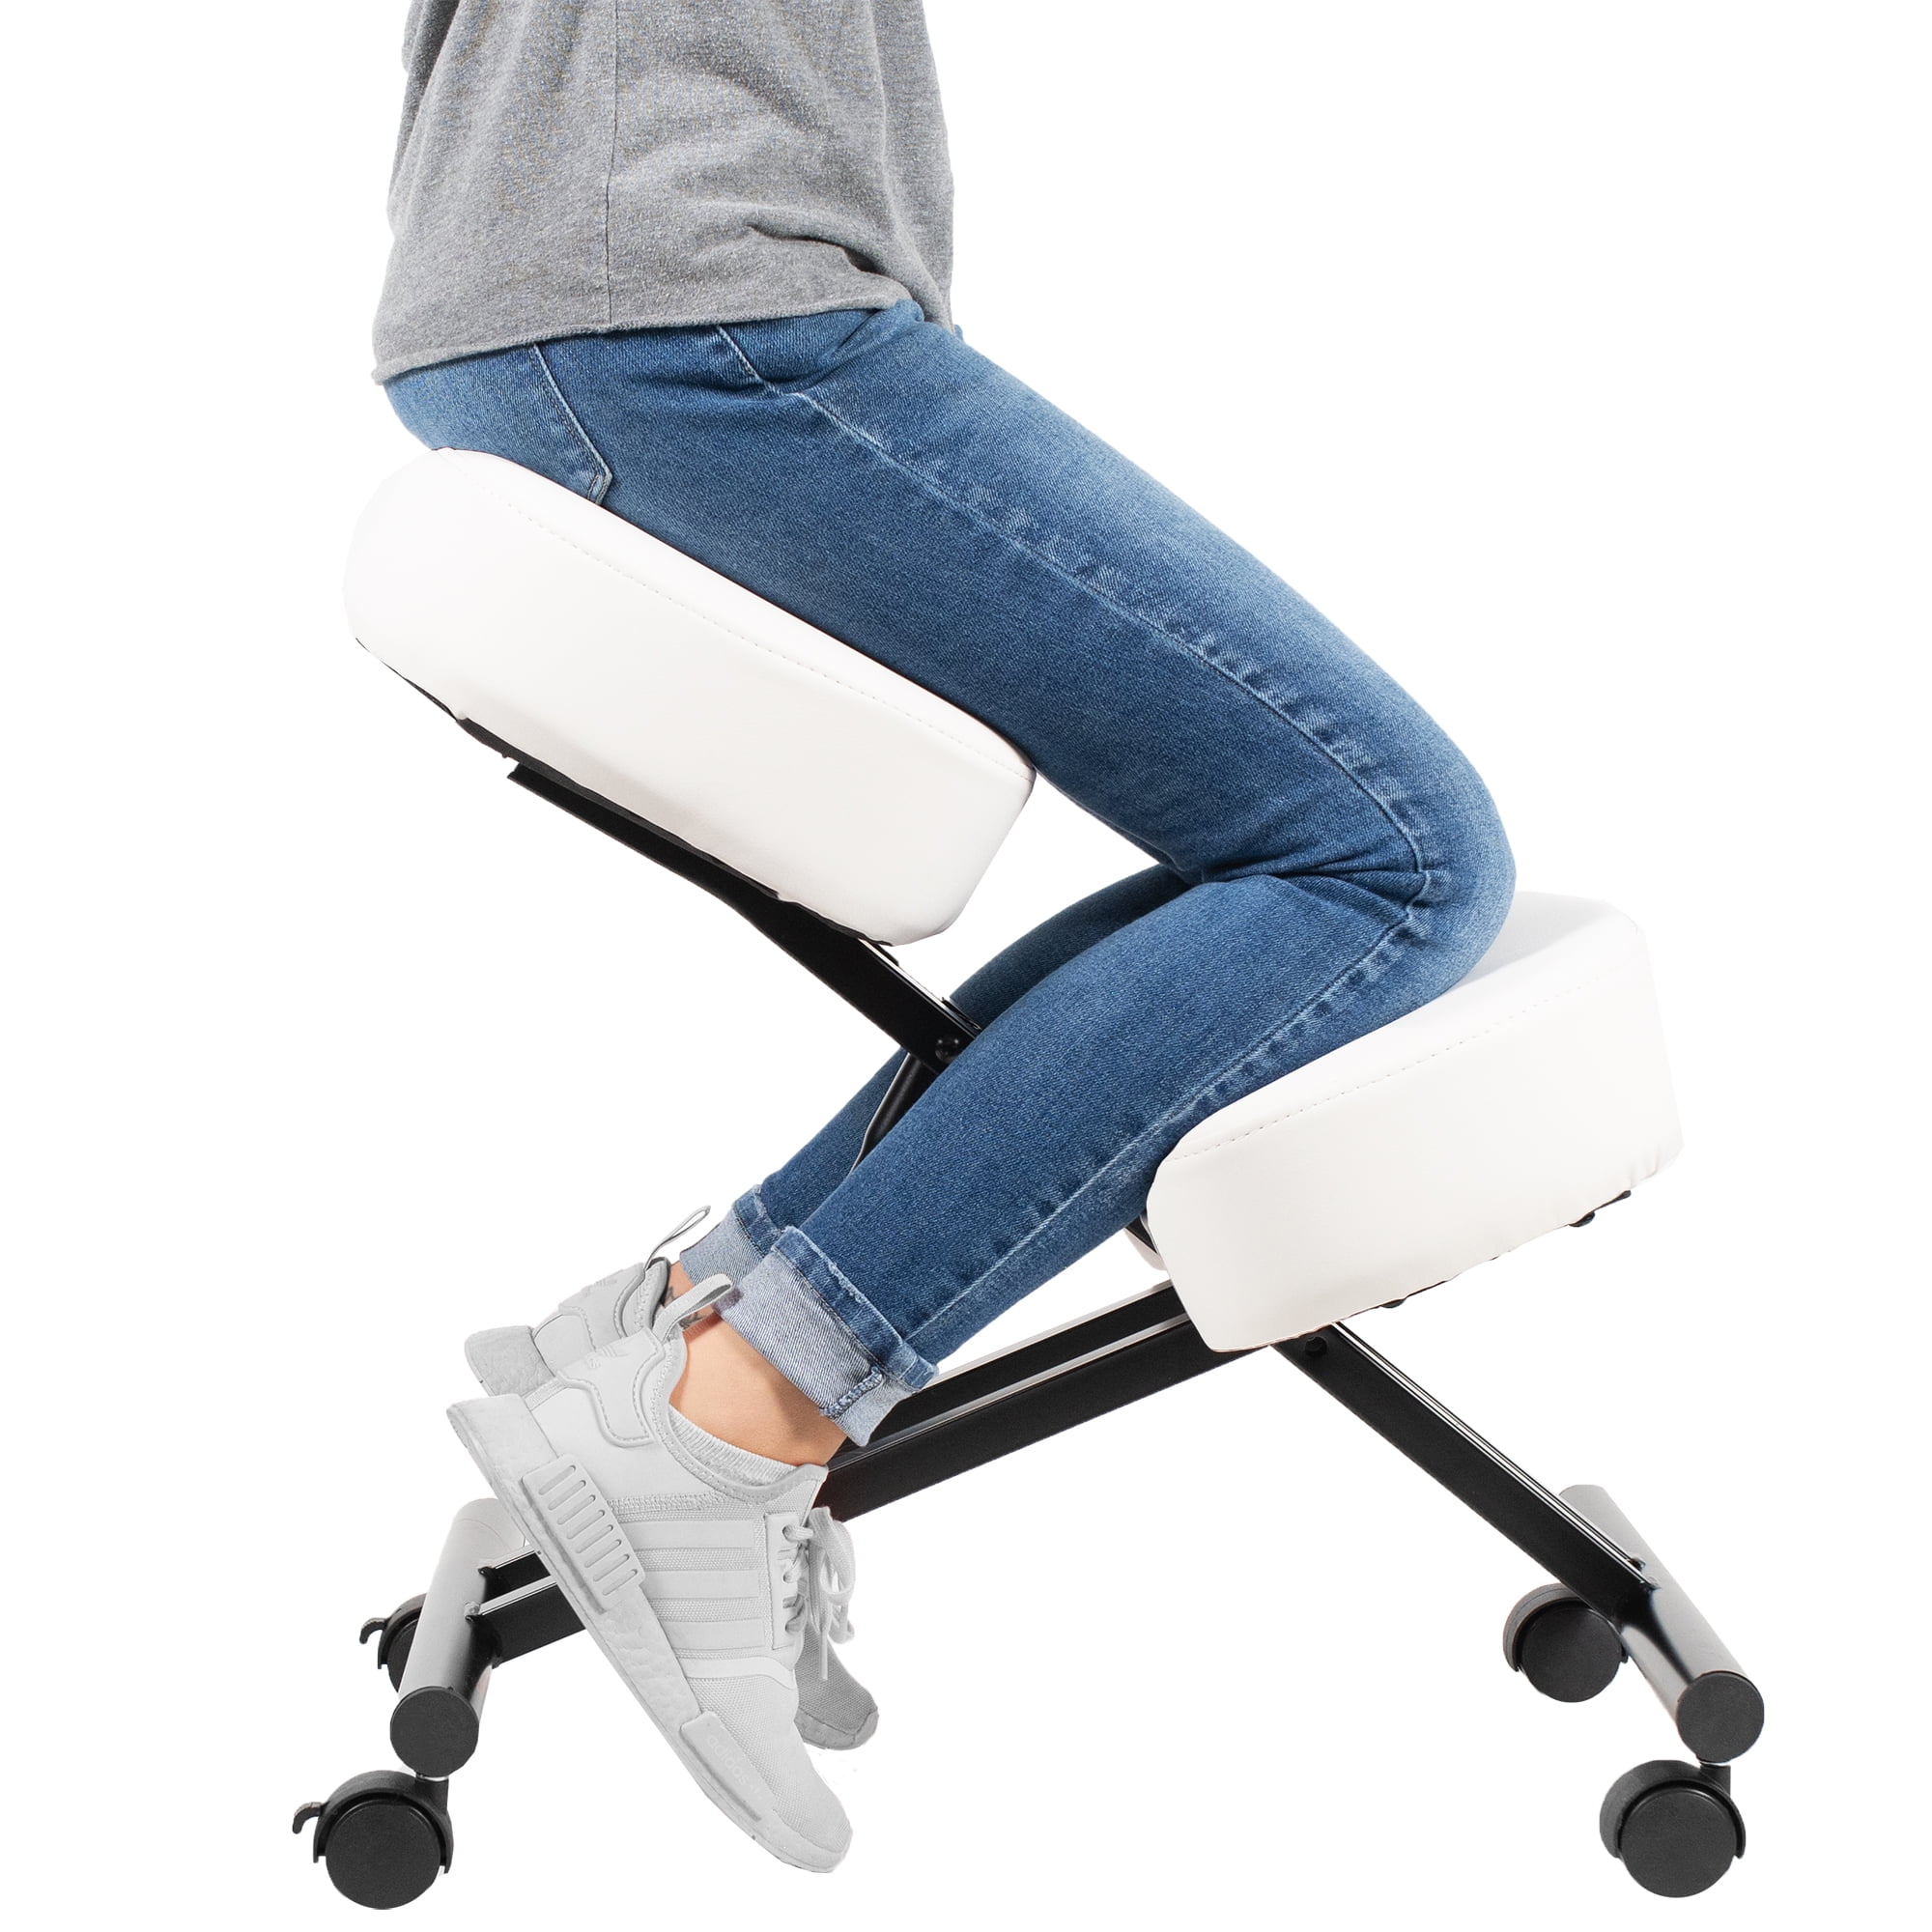 Back Support Office Chair - Flower Love  Ergonomic chair, Best office chair,  Kneeling chair